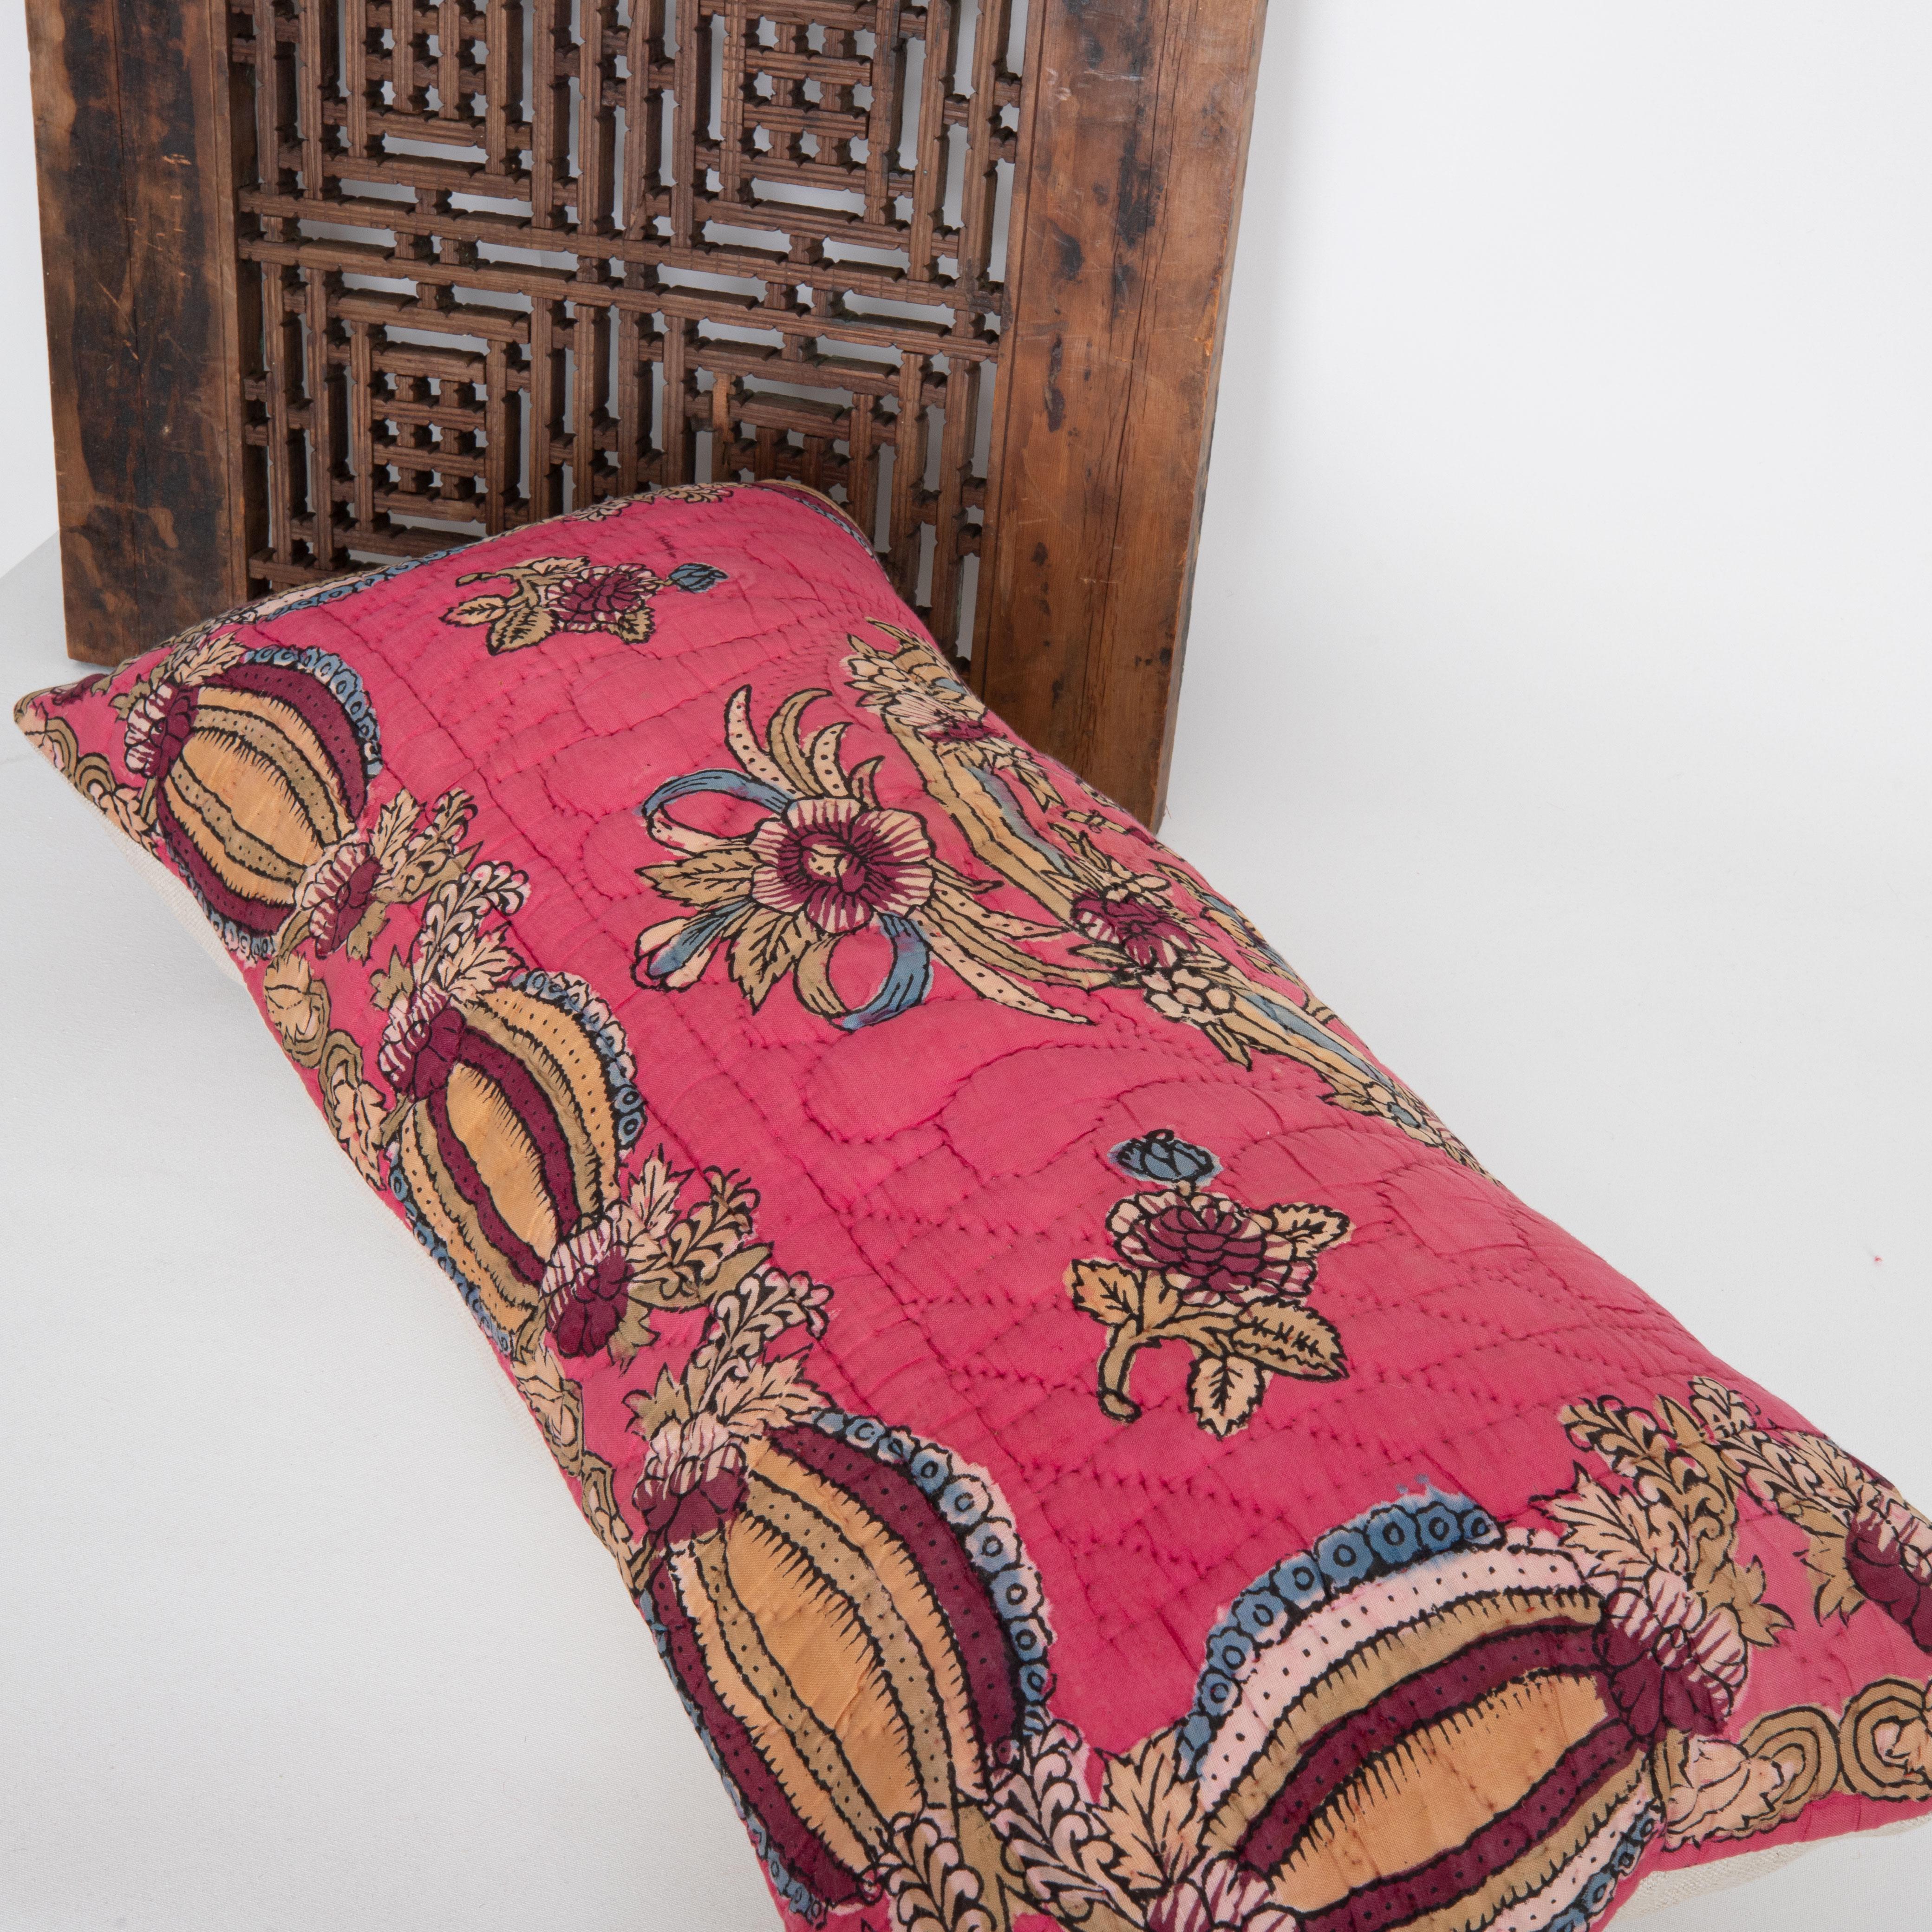 20th Century Pillow Case Made From Mid 20th C. Anatolian Quilt For Sale